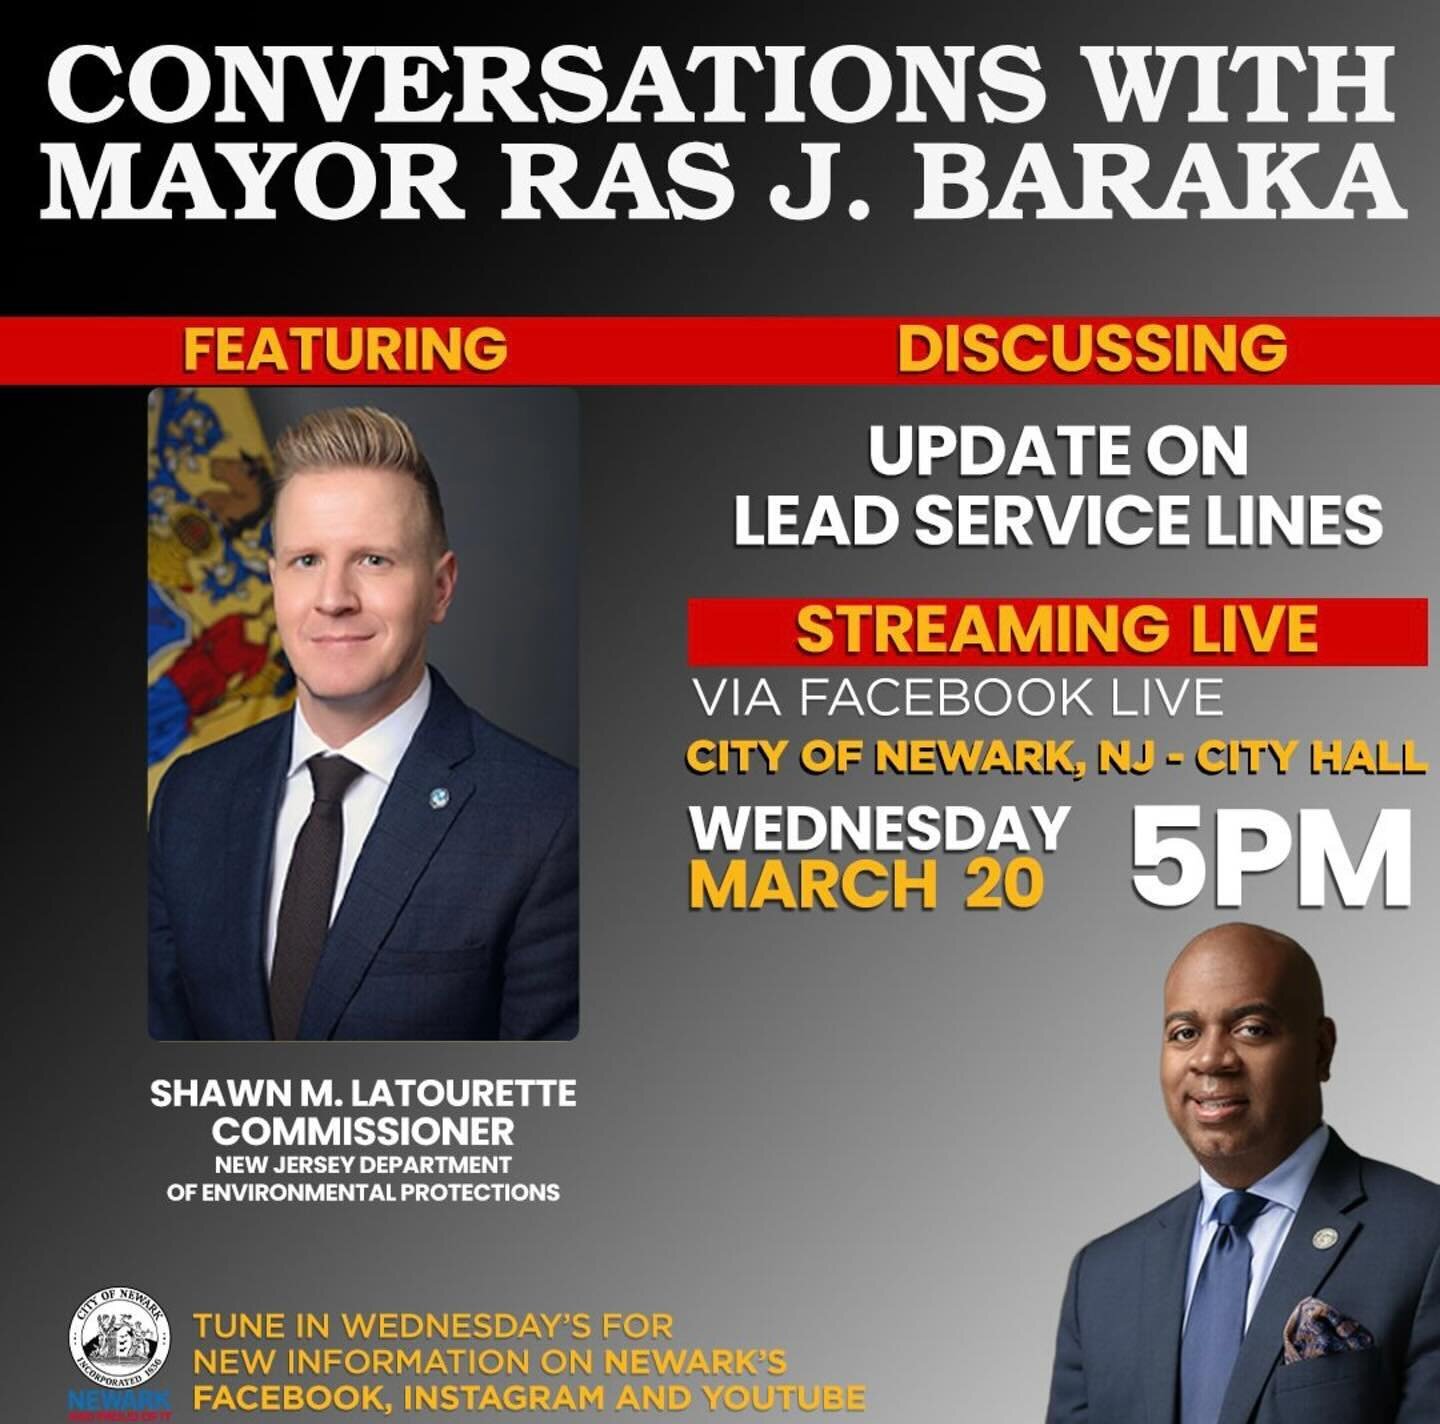 SAVE THE DATE&mdash; Tune in to the City&rsquo;s Facebook Live next week on Wednesday, March 20th at 5pm to hear an important update on Newark&rsquo;s lead service line audits from Mayor Baraka and Commissioner LaTourette. 
facebook.com/cityofnewark